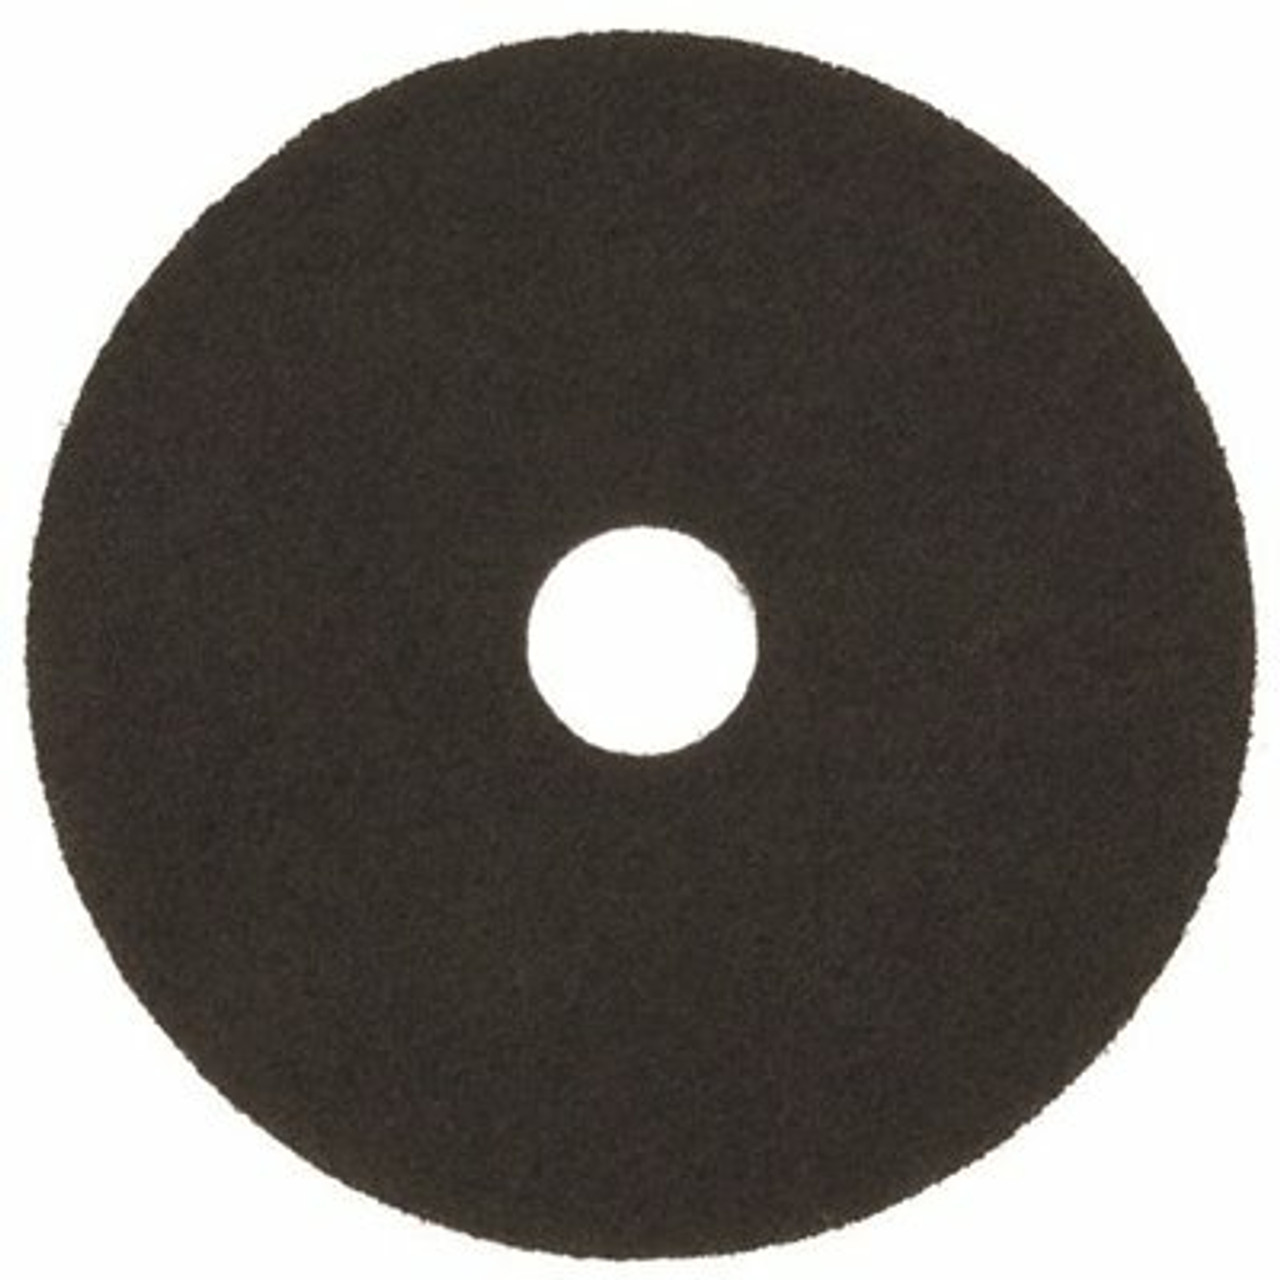 3M 14 In. Black Stripping Floor Pad (5-Count)